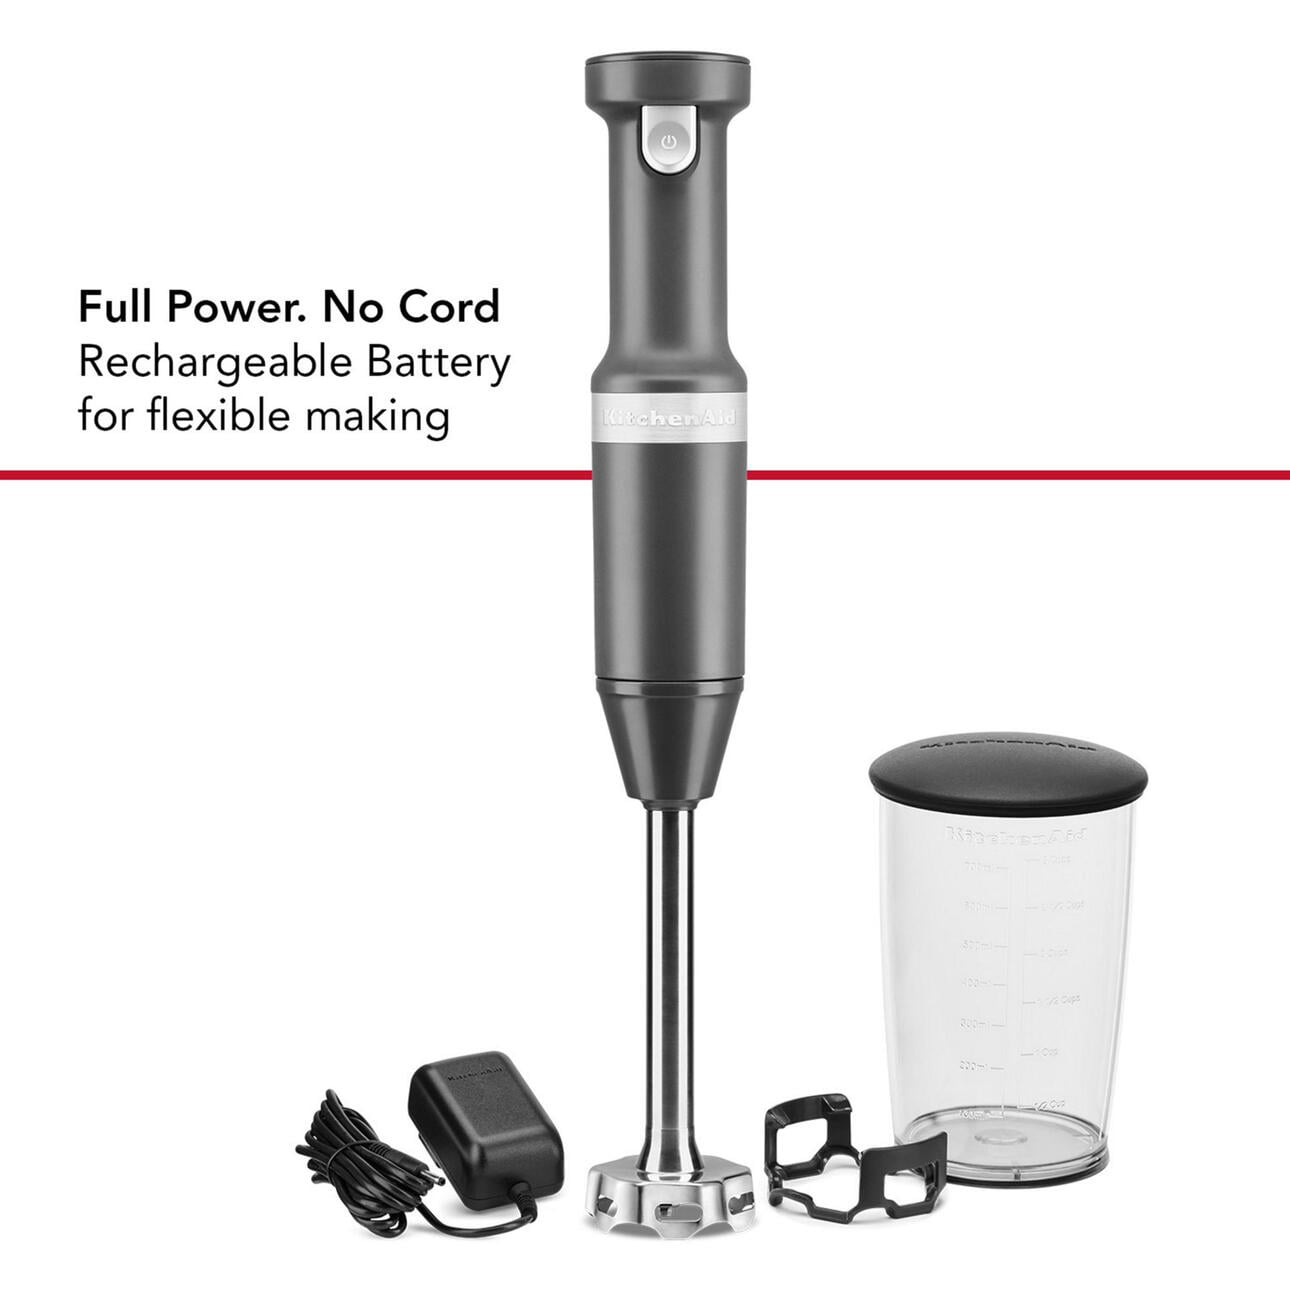 KitchenAid Cordless Variable Speed Hand Blender with Chopper and Whisk Attachment - KHBBV83 - 2